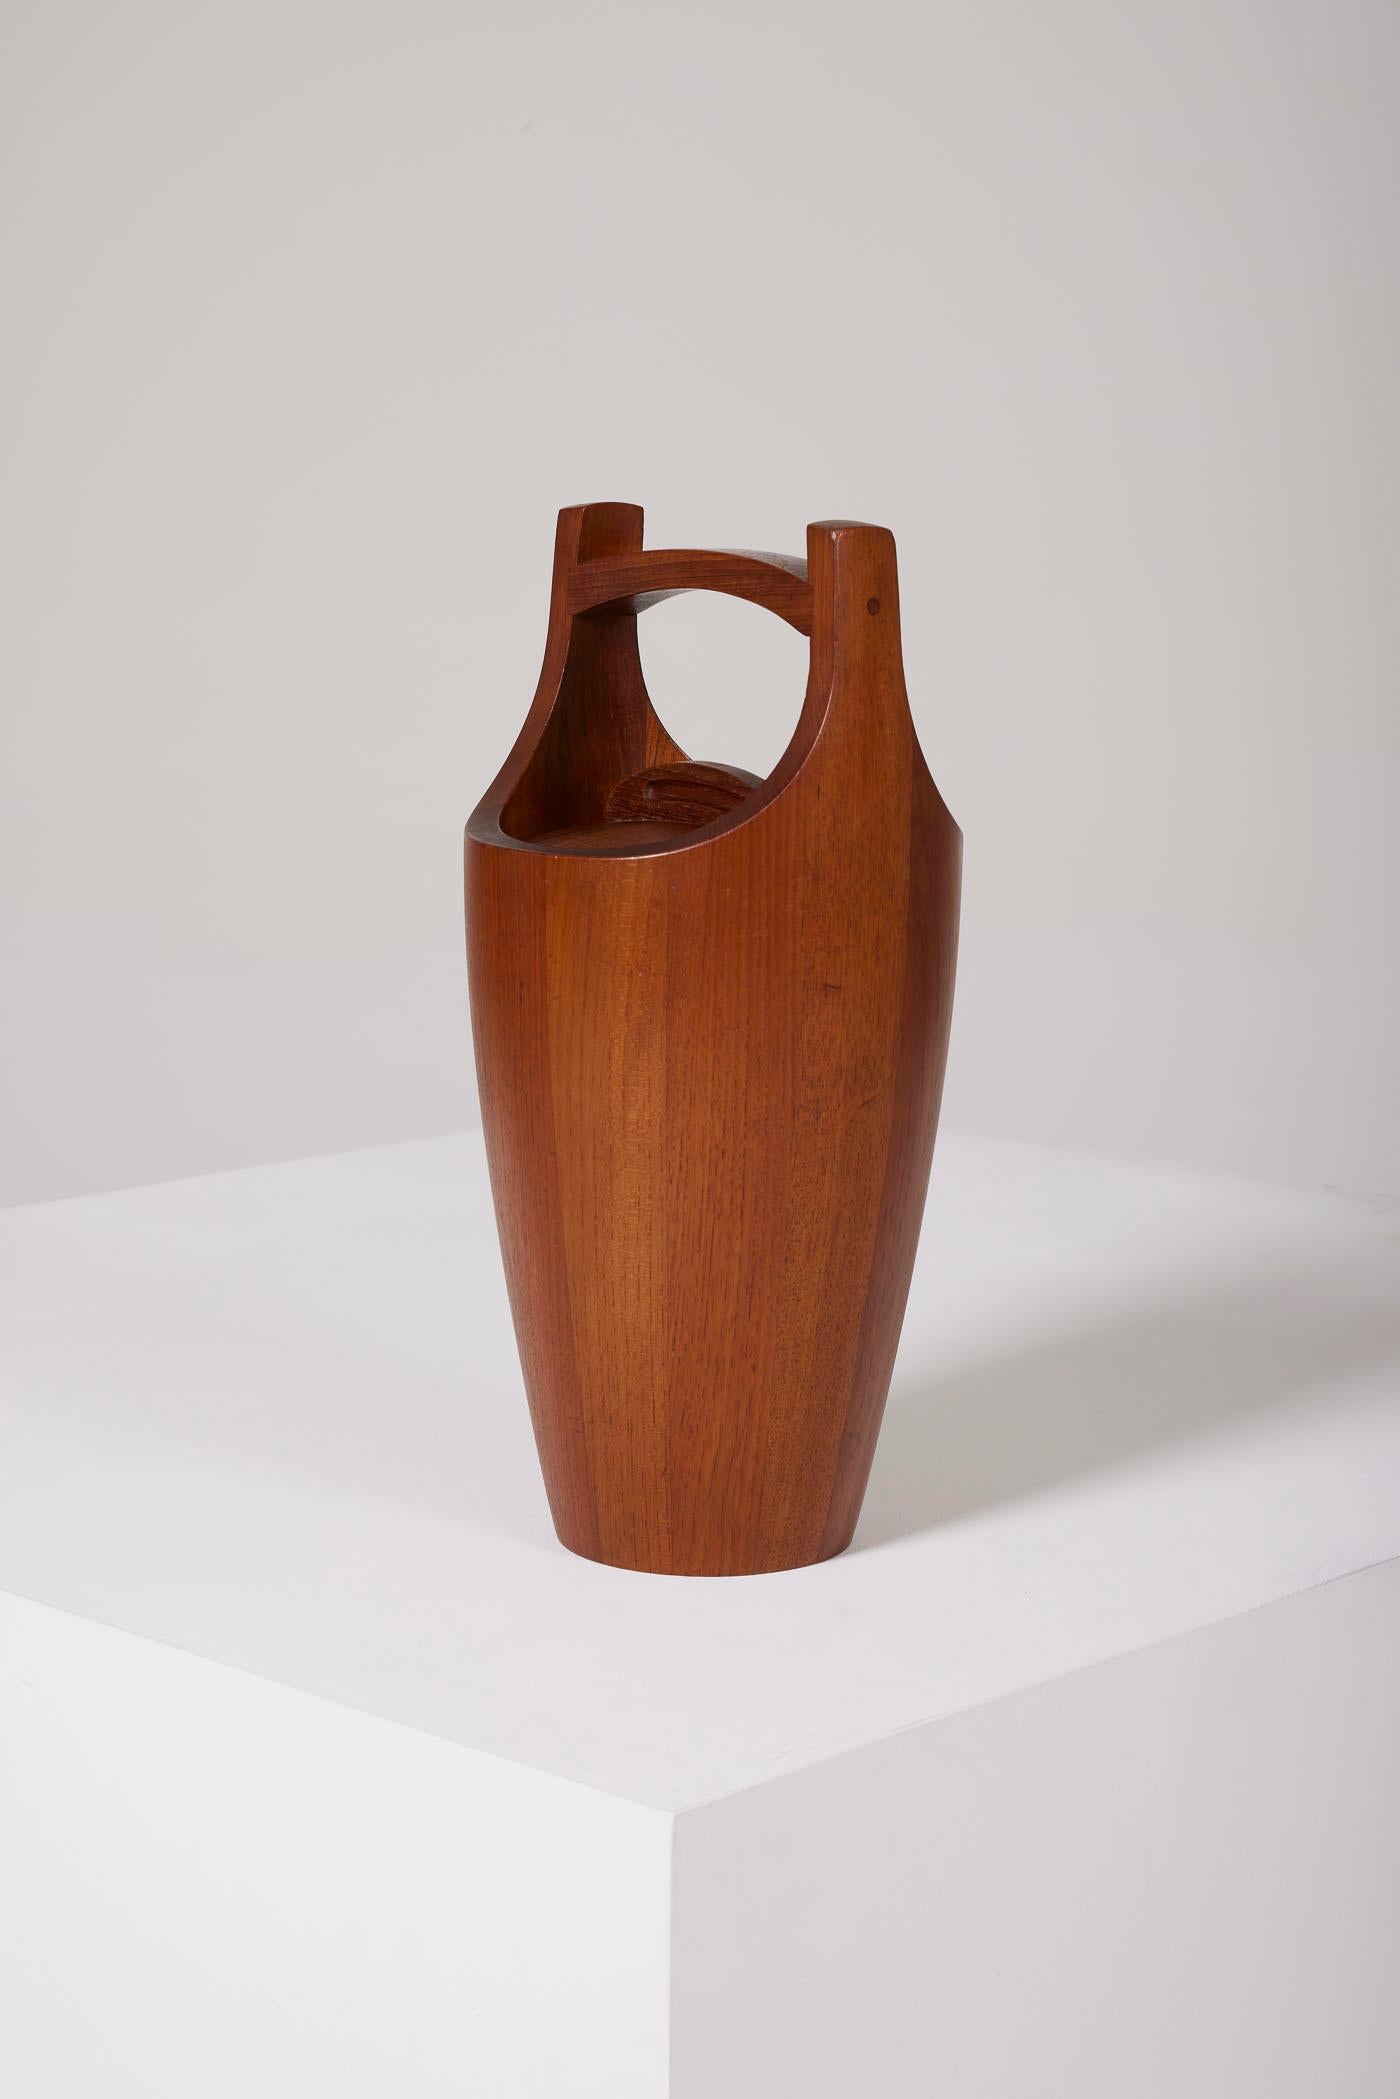 Ice bucket in wood by Jens Quitsgaard 1